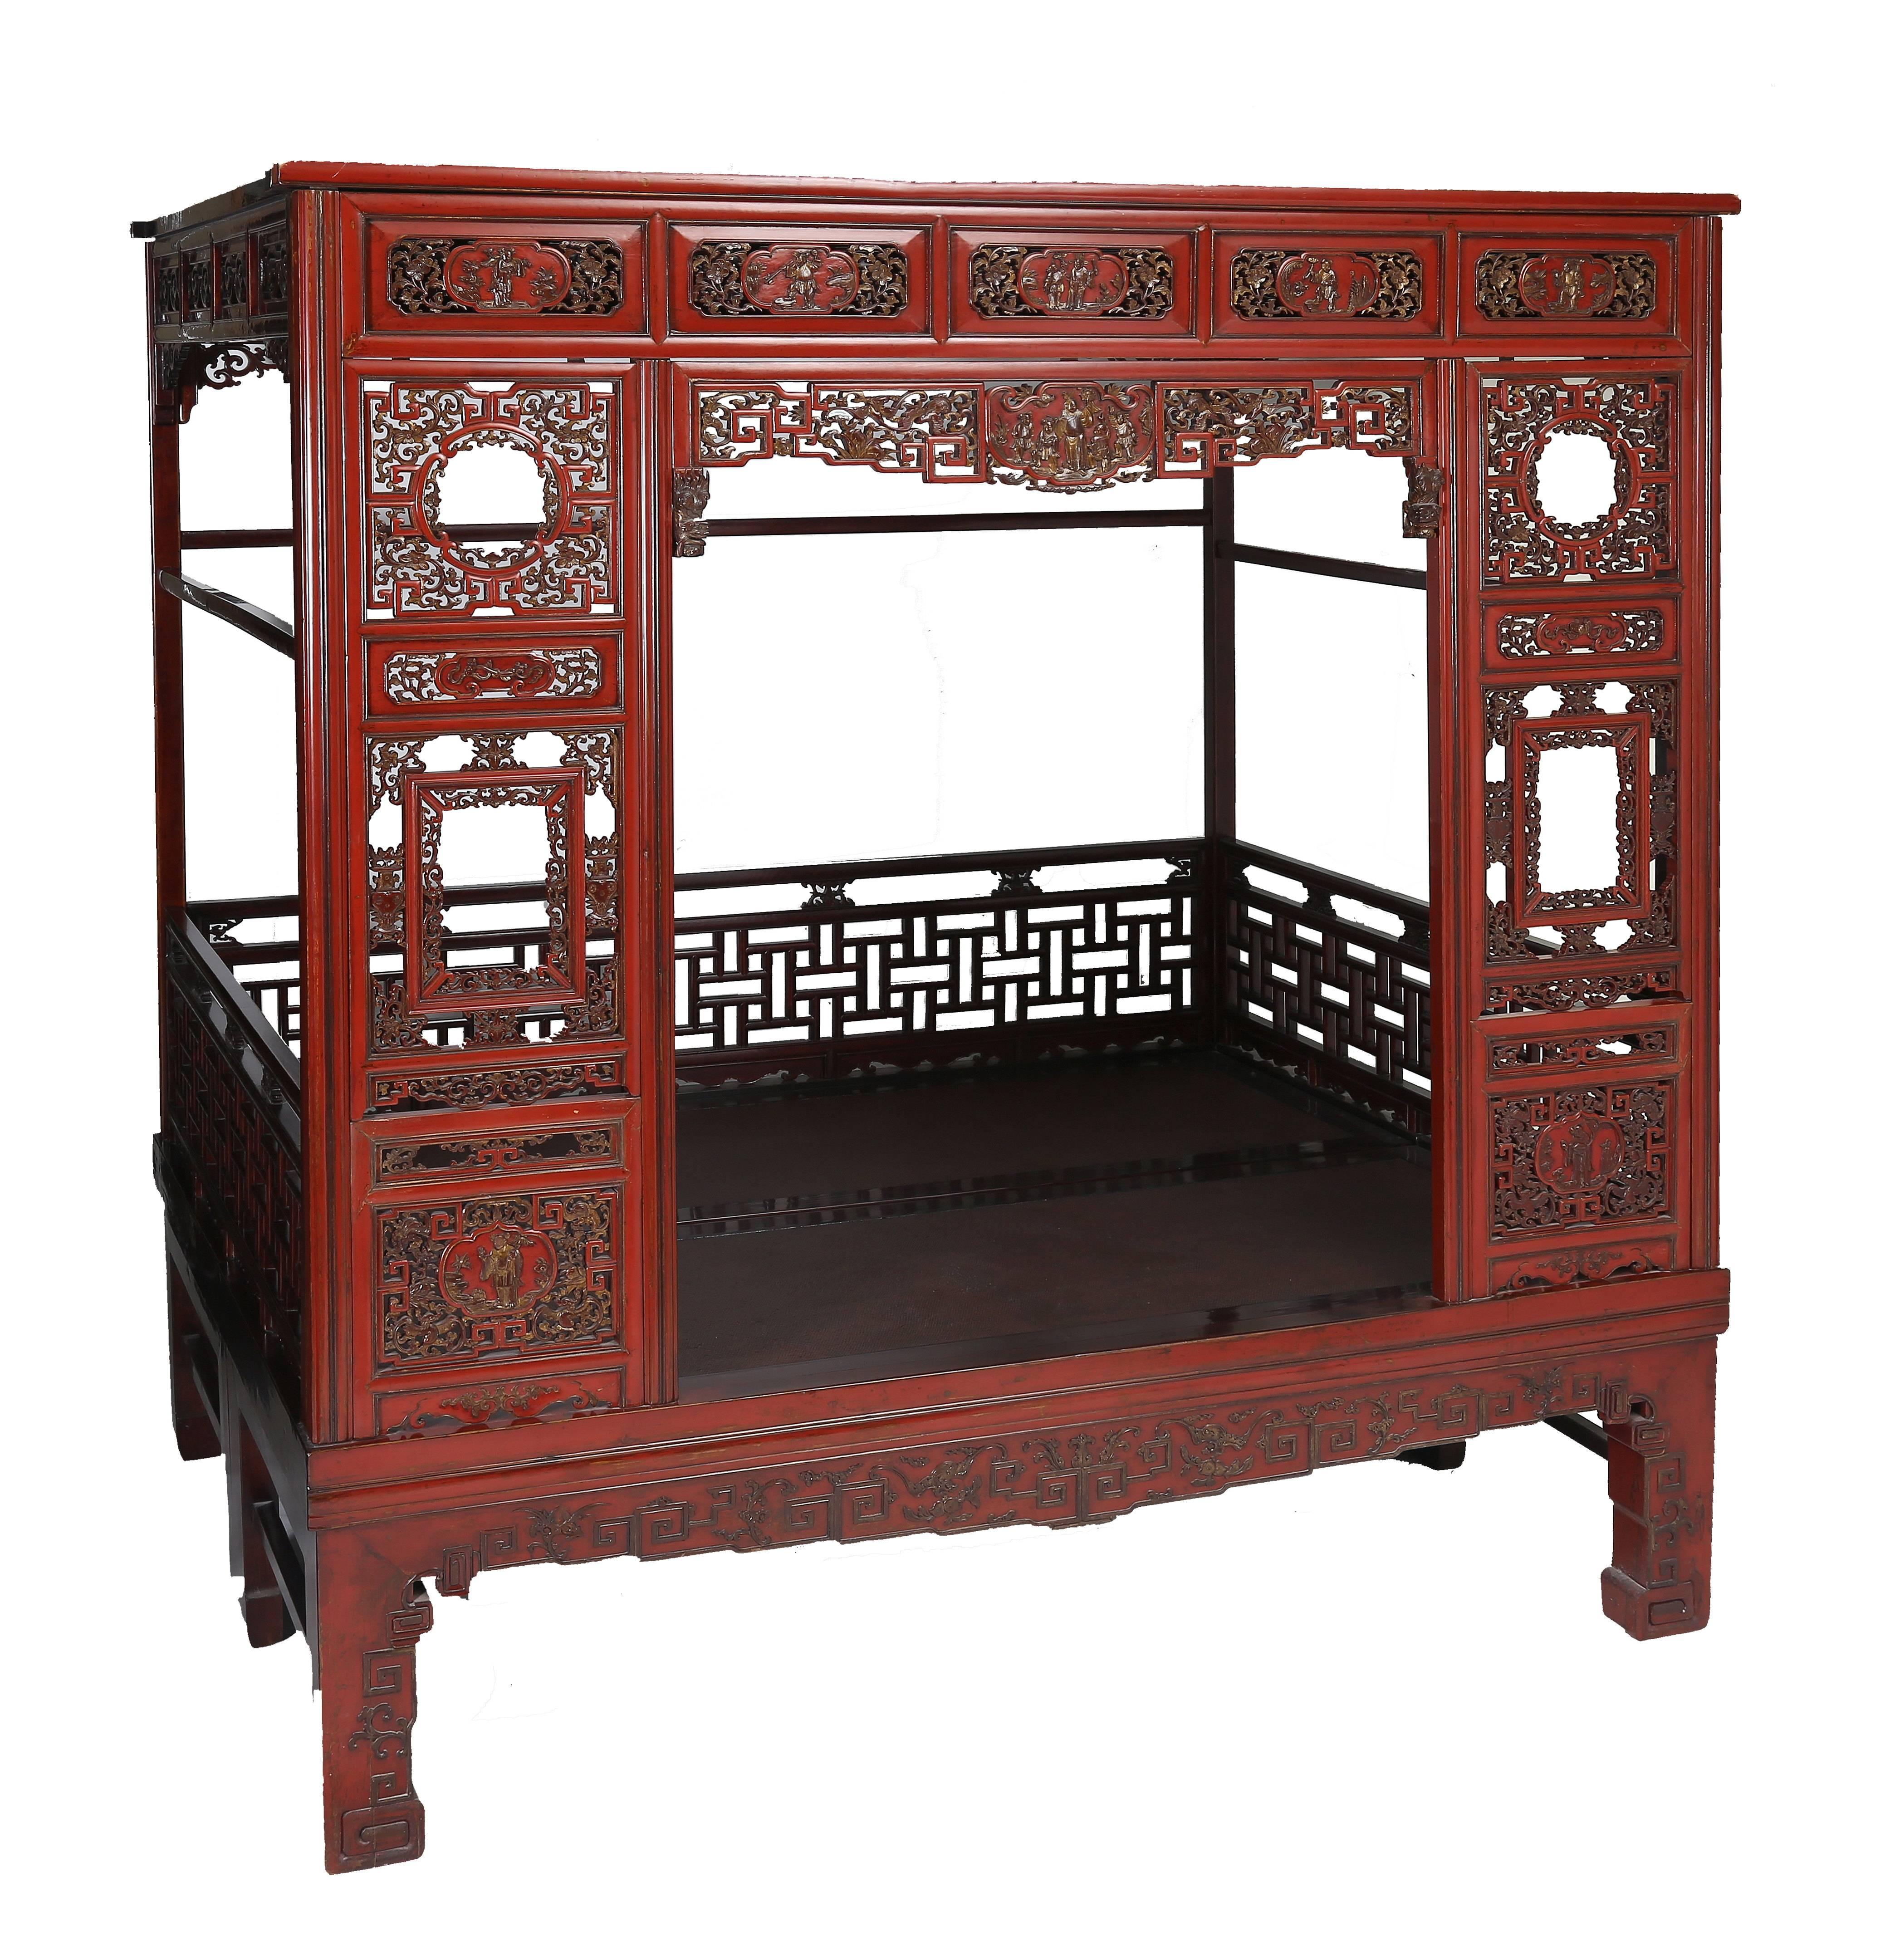 The double bed bases joint in the middle as one, the frames enclosing the hard cane top, aprons and feet relief-carved with lingzhi, bats, peaches, ruyi cloud, floral foliage and reticulated scroll work; four posts forming the frame for the lattice